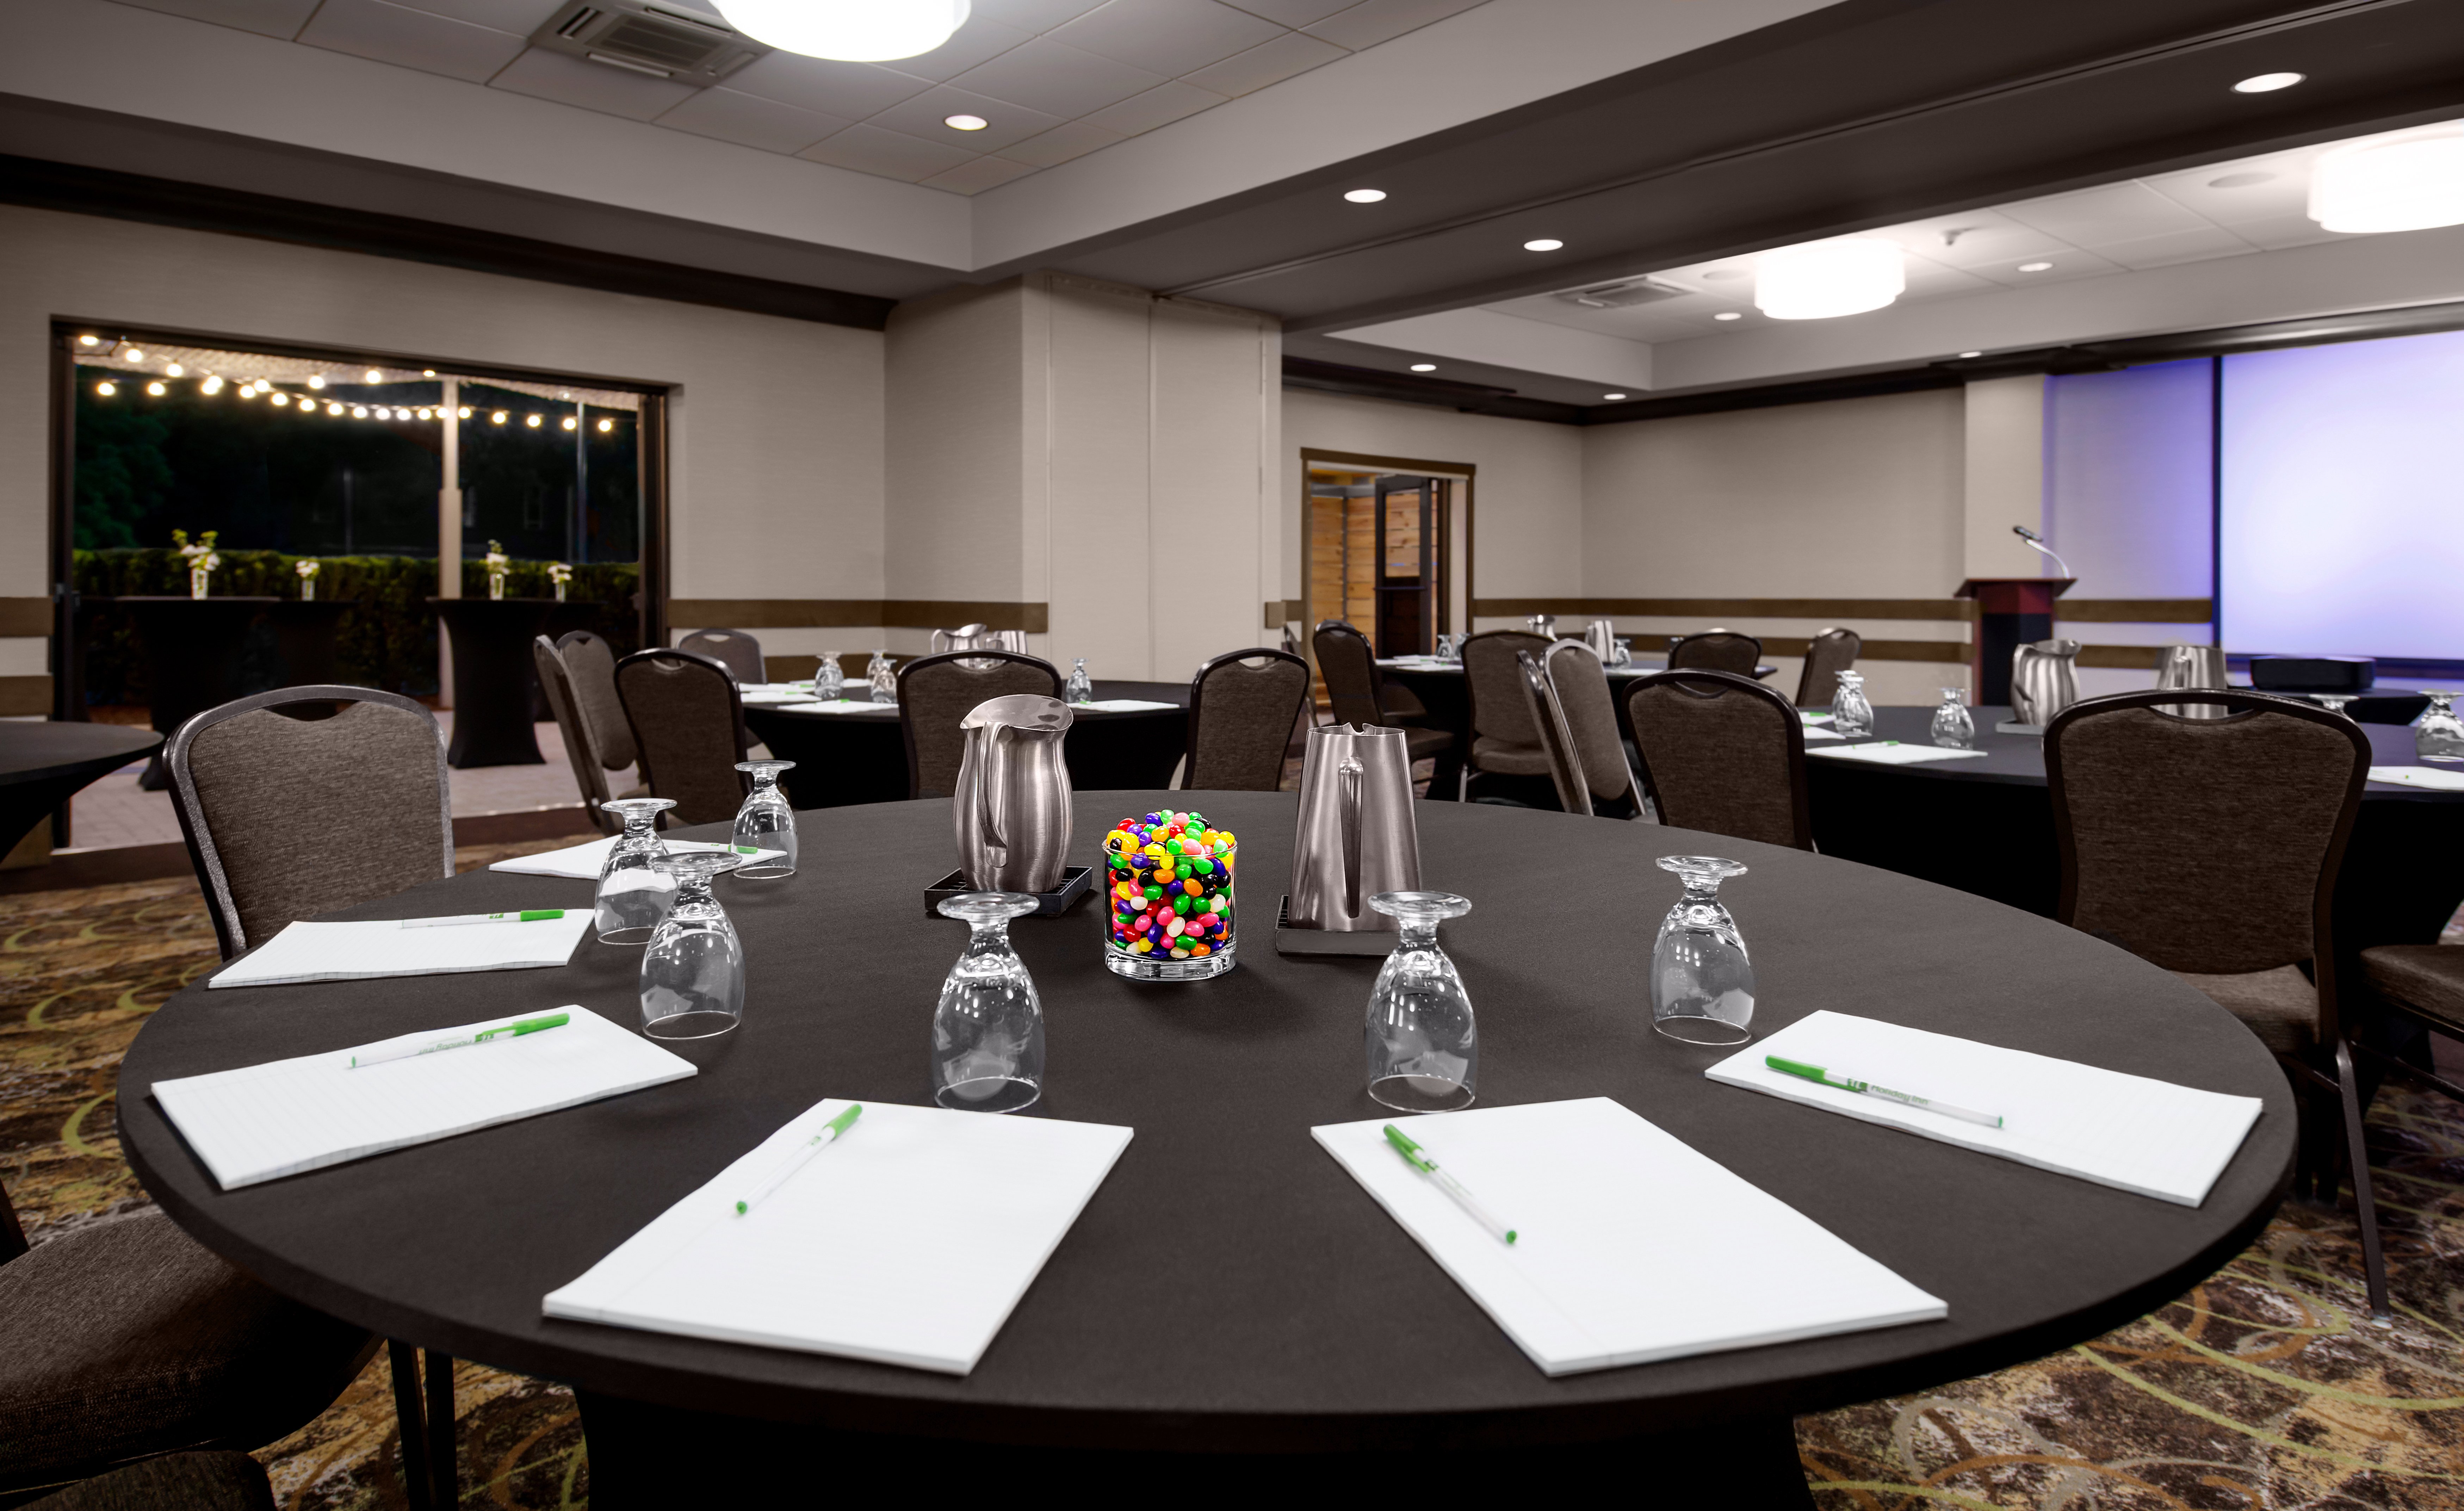 Centennial Ballroom is available for your meeting needs